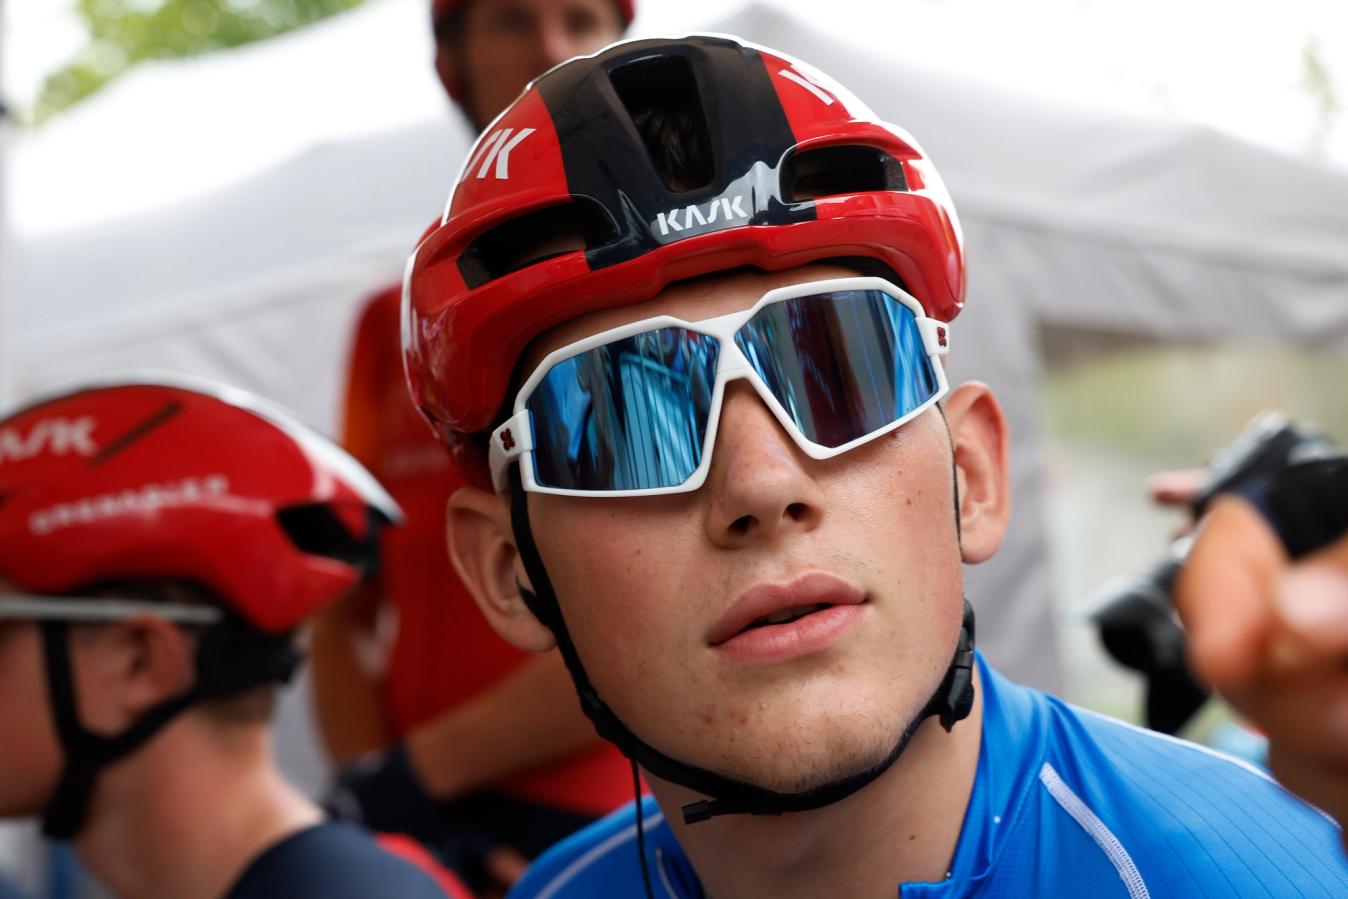 The Geraint Thomas SunGod glasses may have been limited edition, but that bears little relevance to mates of the 2018 Tour de France champion, eh 